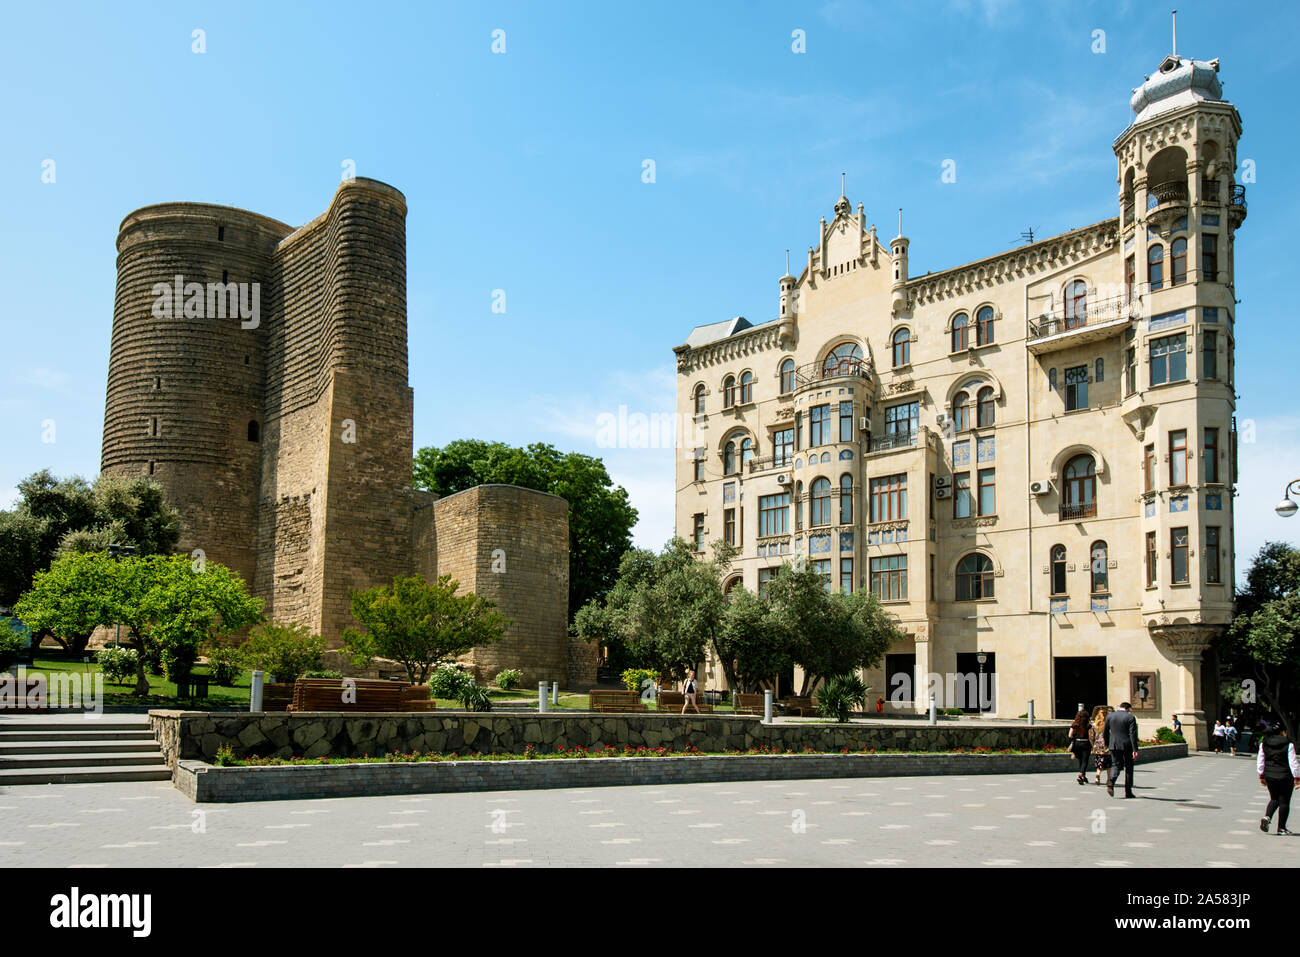 The Maiden Tower (Qiz Qalasi), a 12th century monument in the Old City, and a 19th century building. A UNESCO World Heritage Site. Baku, Azerbaijan Stock Photo